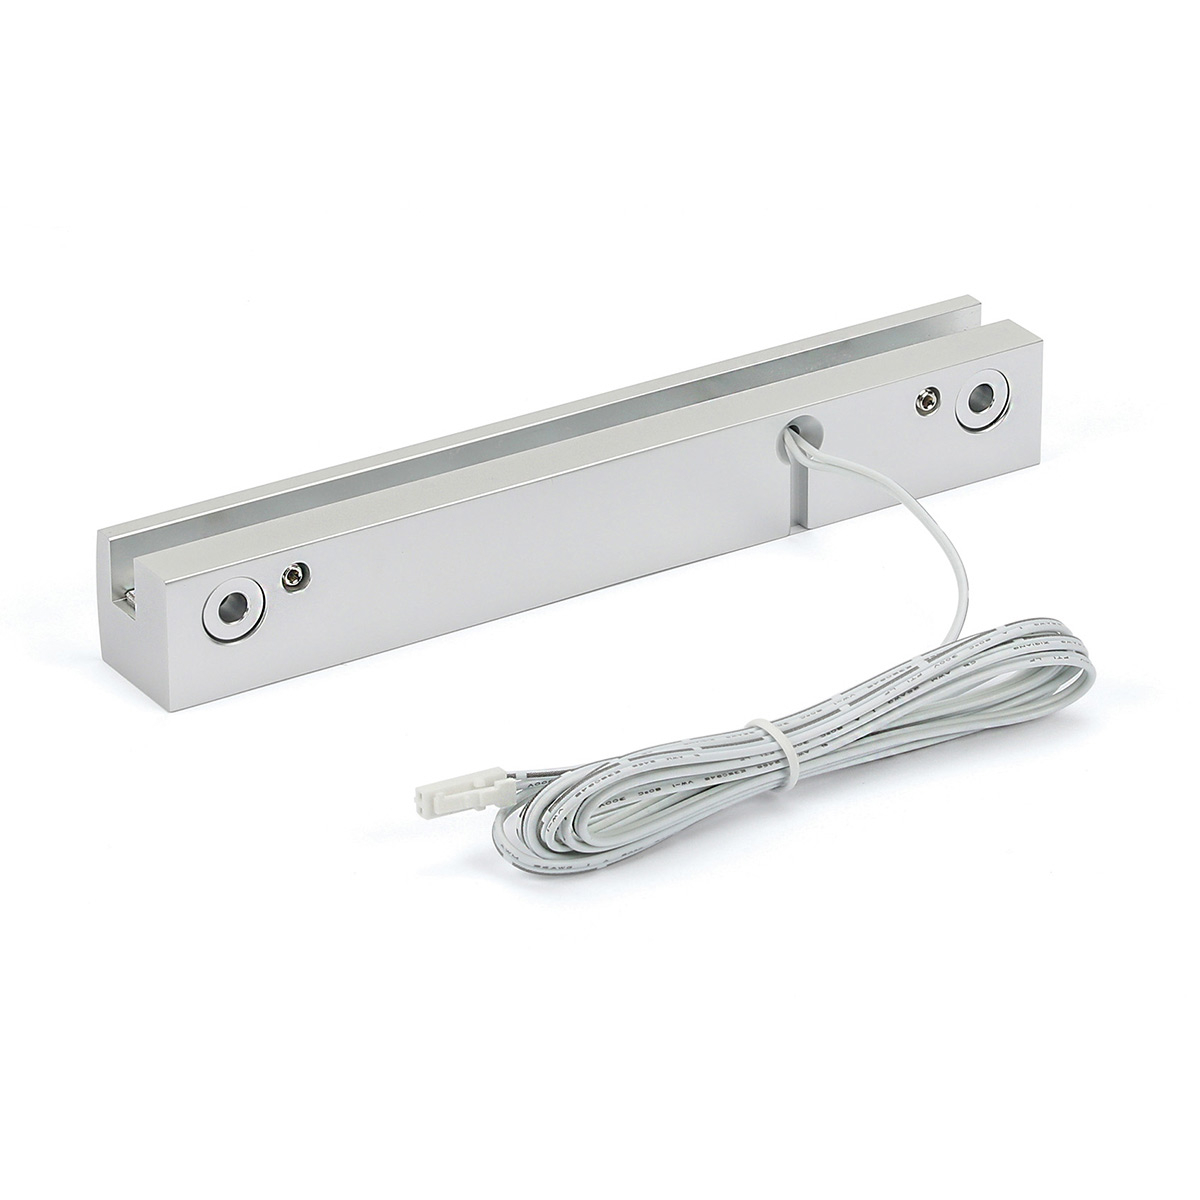 WHITE LED Sign Clamp in 4 3/4'' (120 mm) length X 1'' (25.4 mm) Silver satin aluminum finish.Mount Kit Supports Signs Up To 5/16'' Thick, Wall Mount, Low Voltage transformer included.